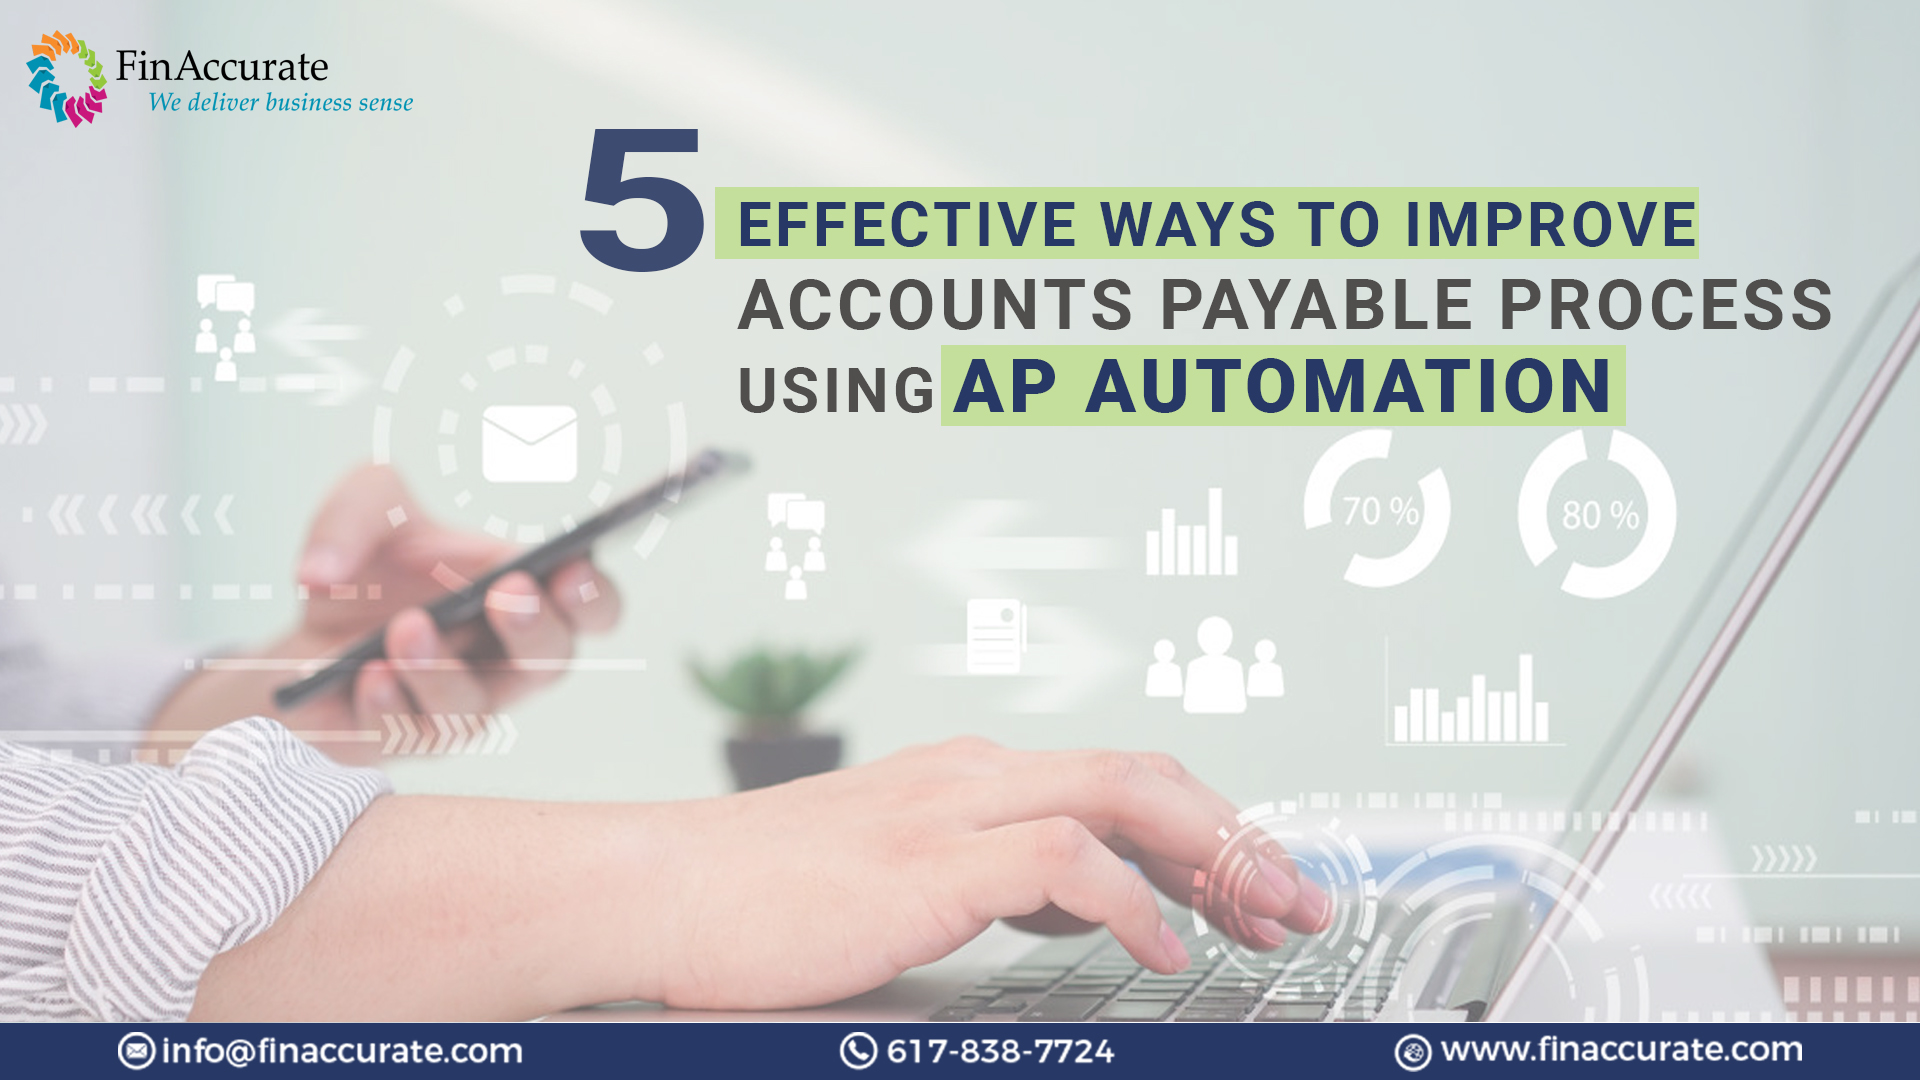 5 Effective Ways To Improve Accounts Payable Process Using AP Automation